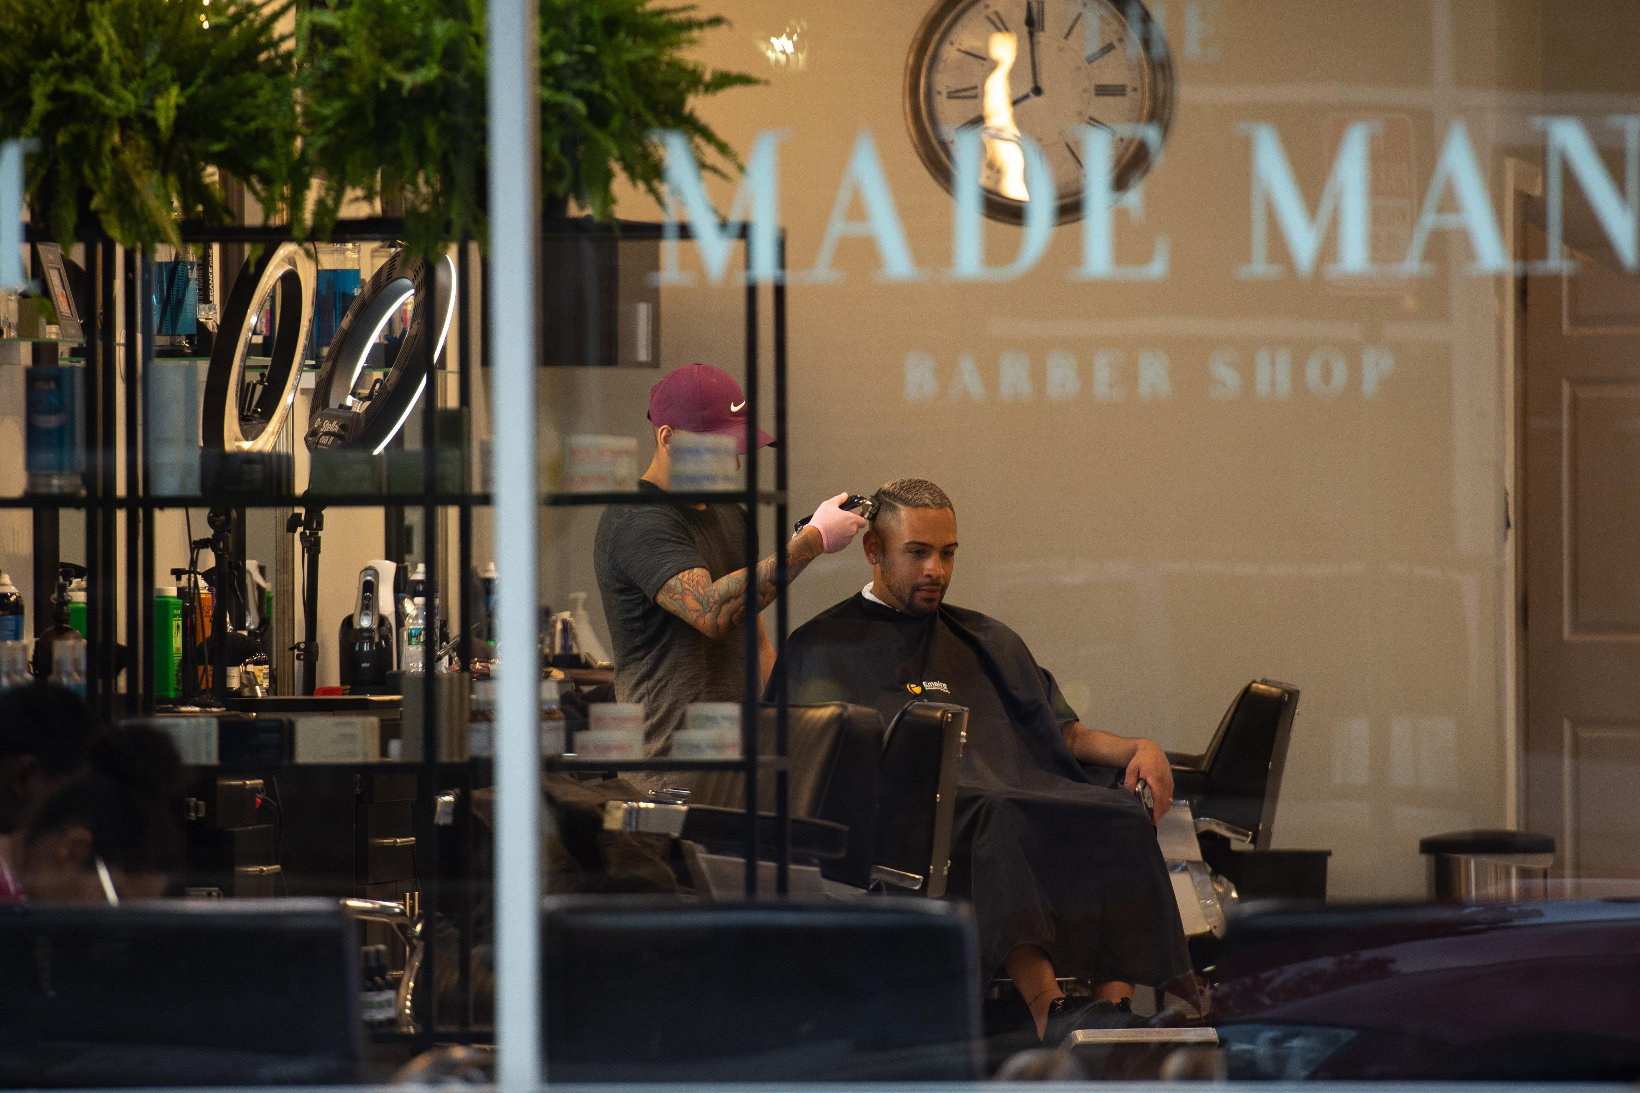 Top Of The Game Barbershop - Woodbridge - Book Online - Prices, Reviews,  Photos